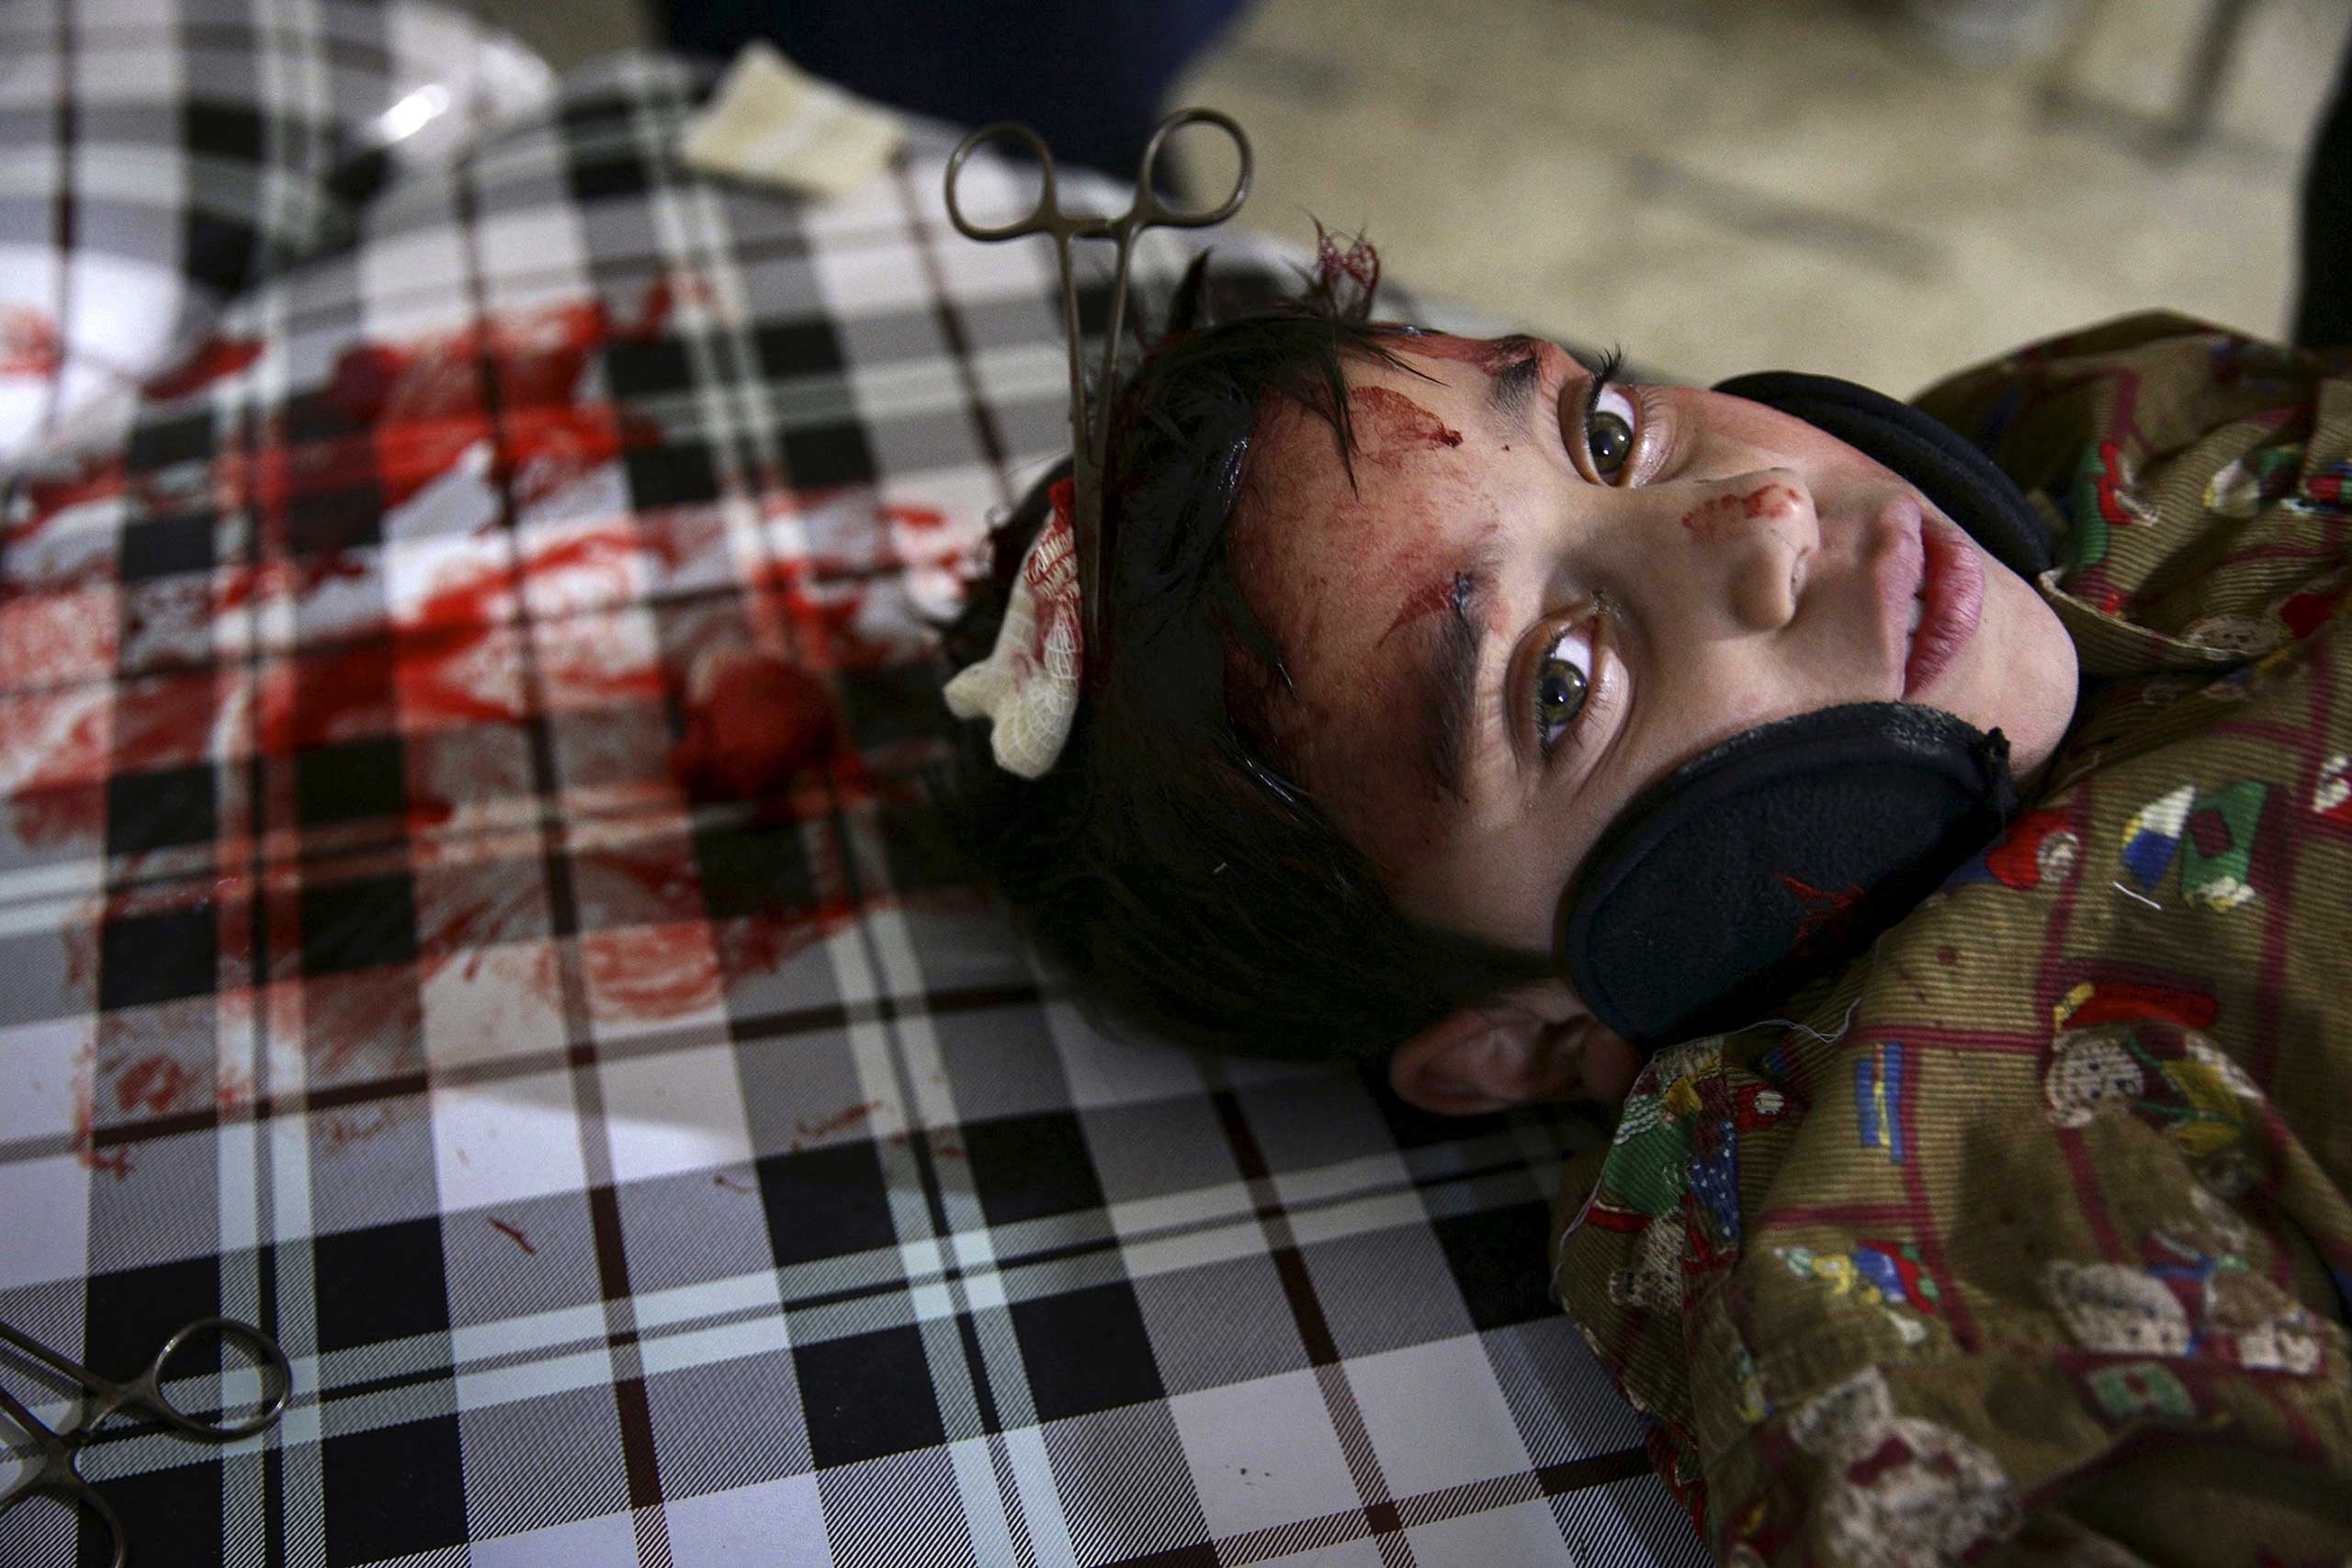 An injured boy undergoing surgery, after he was injured in what activists said was an airstrike by forces loyal to Syria's president Bashar al-Assad, rests inside a field hospital in the Douma neighborhood of Damascus, Syria, Dec. 5, 2015.